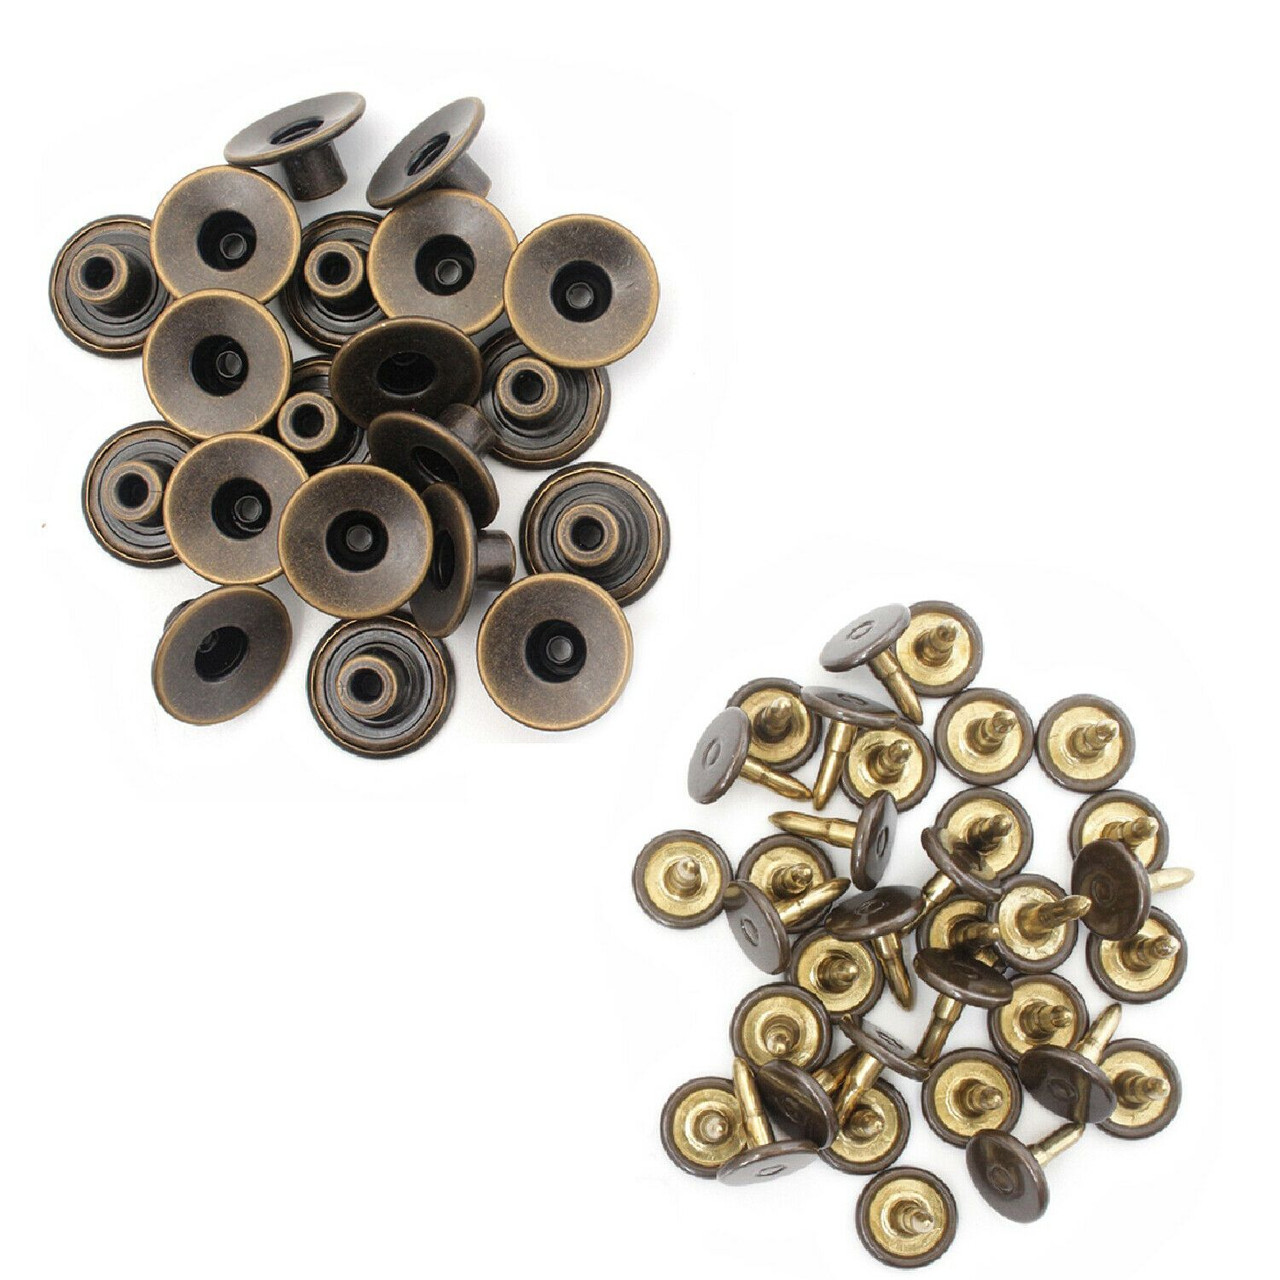 17mm Bronze Open Top Jeans Buttons with Pins - 10pcs